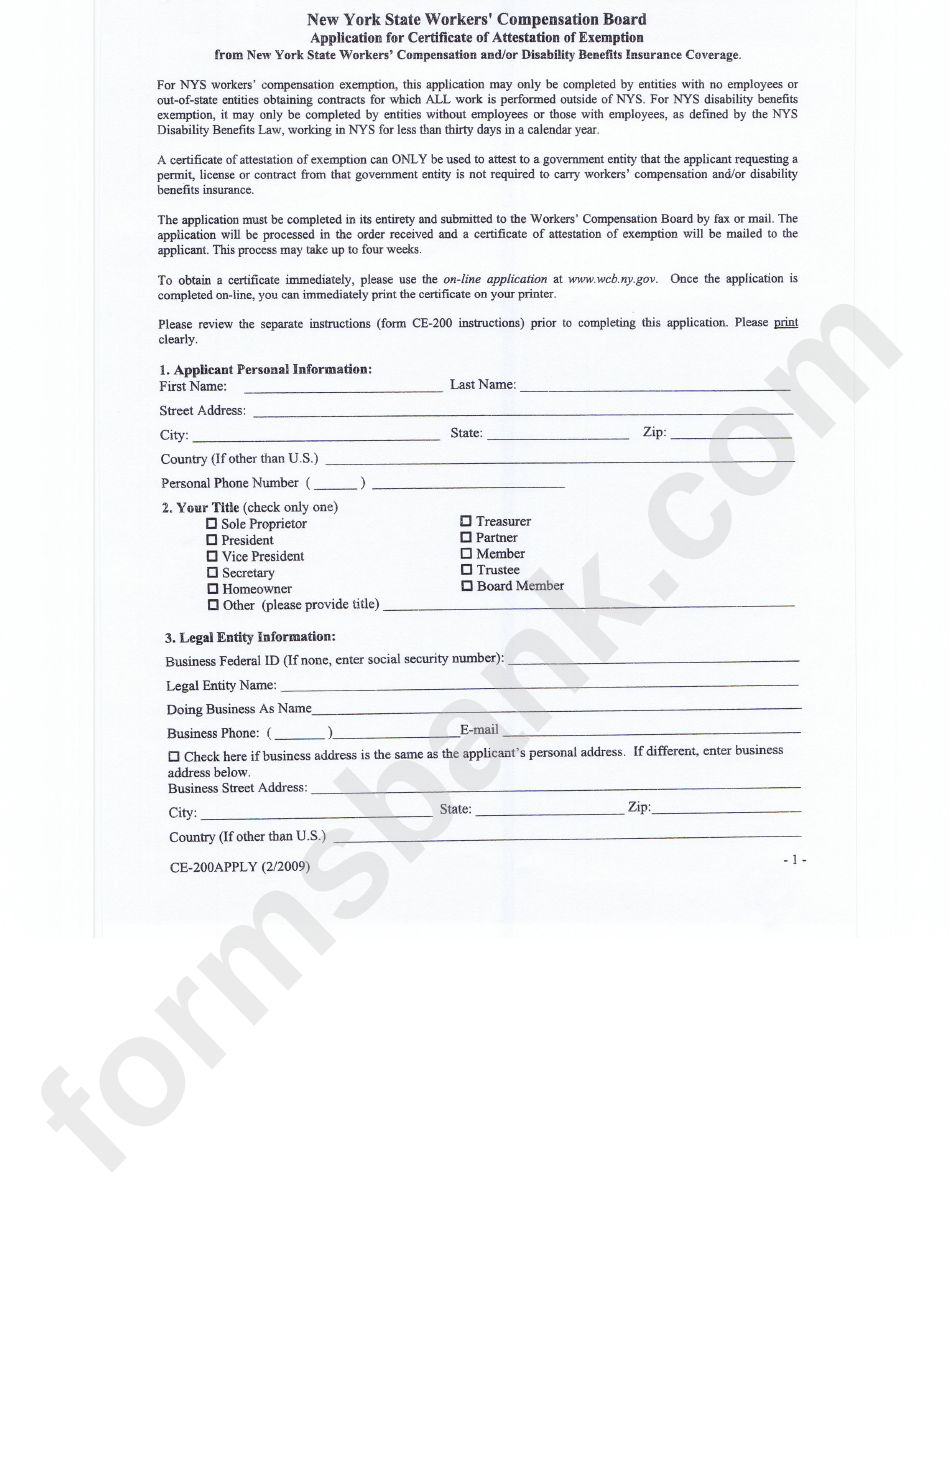 Form Ce-200apply - Application For Certificate Of Attestation Of Exemption From Nys Workers